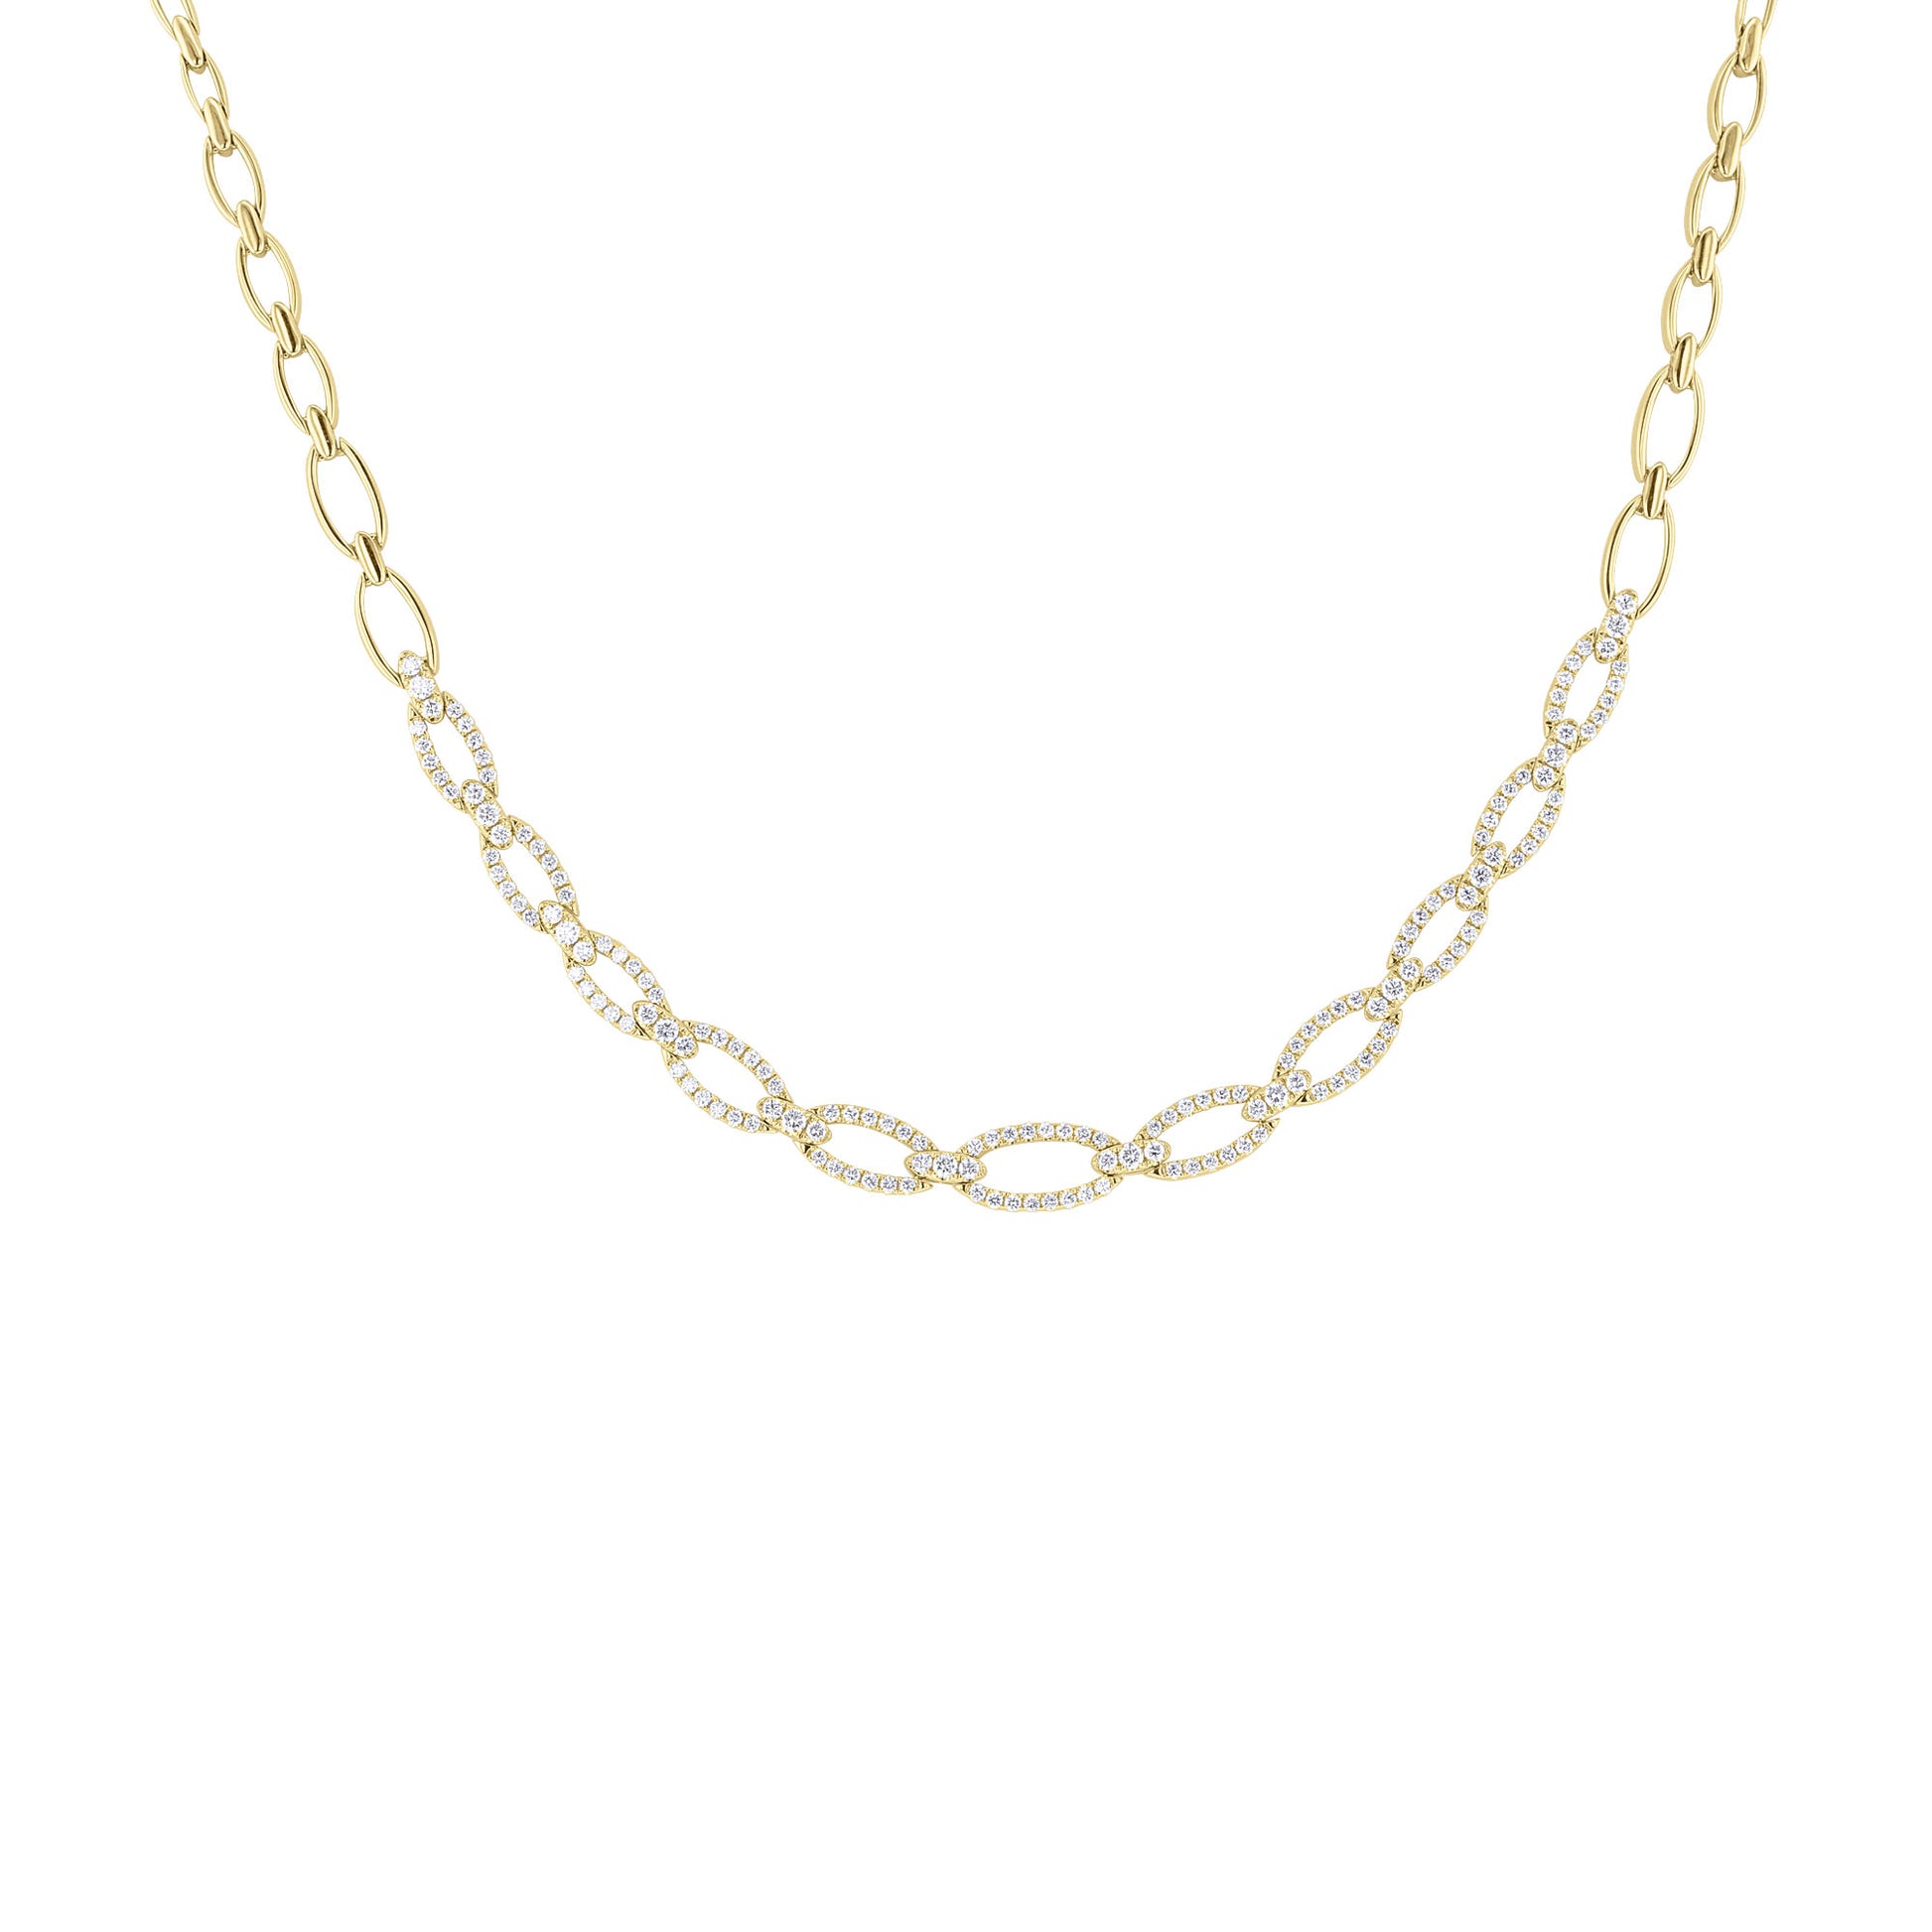 Perfectly Pave Diamond Necklace